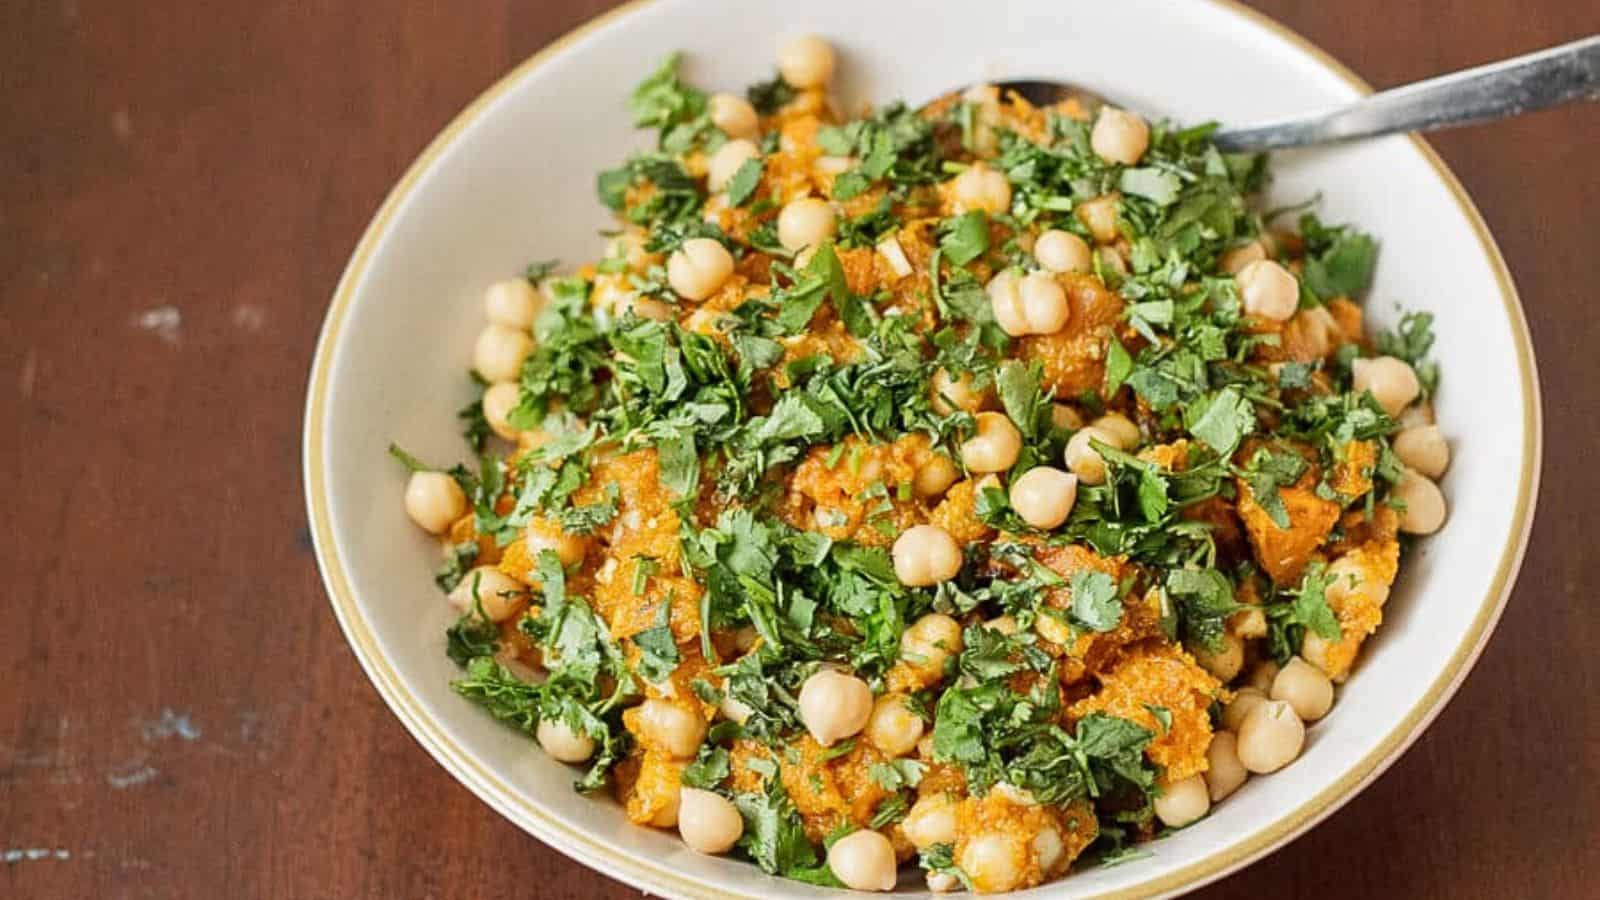 Chickpea and chickpea salad.